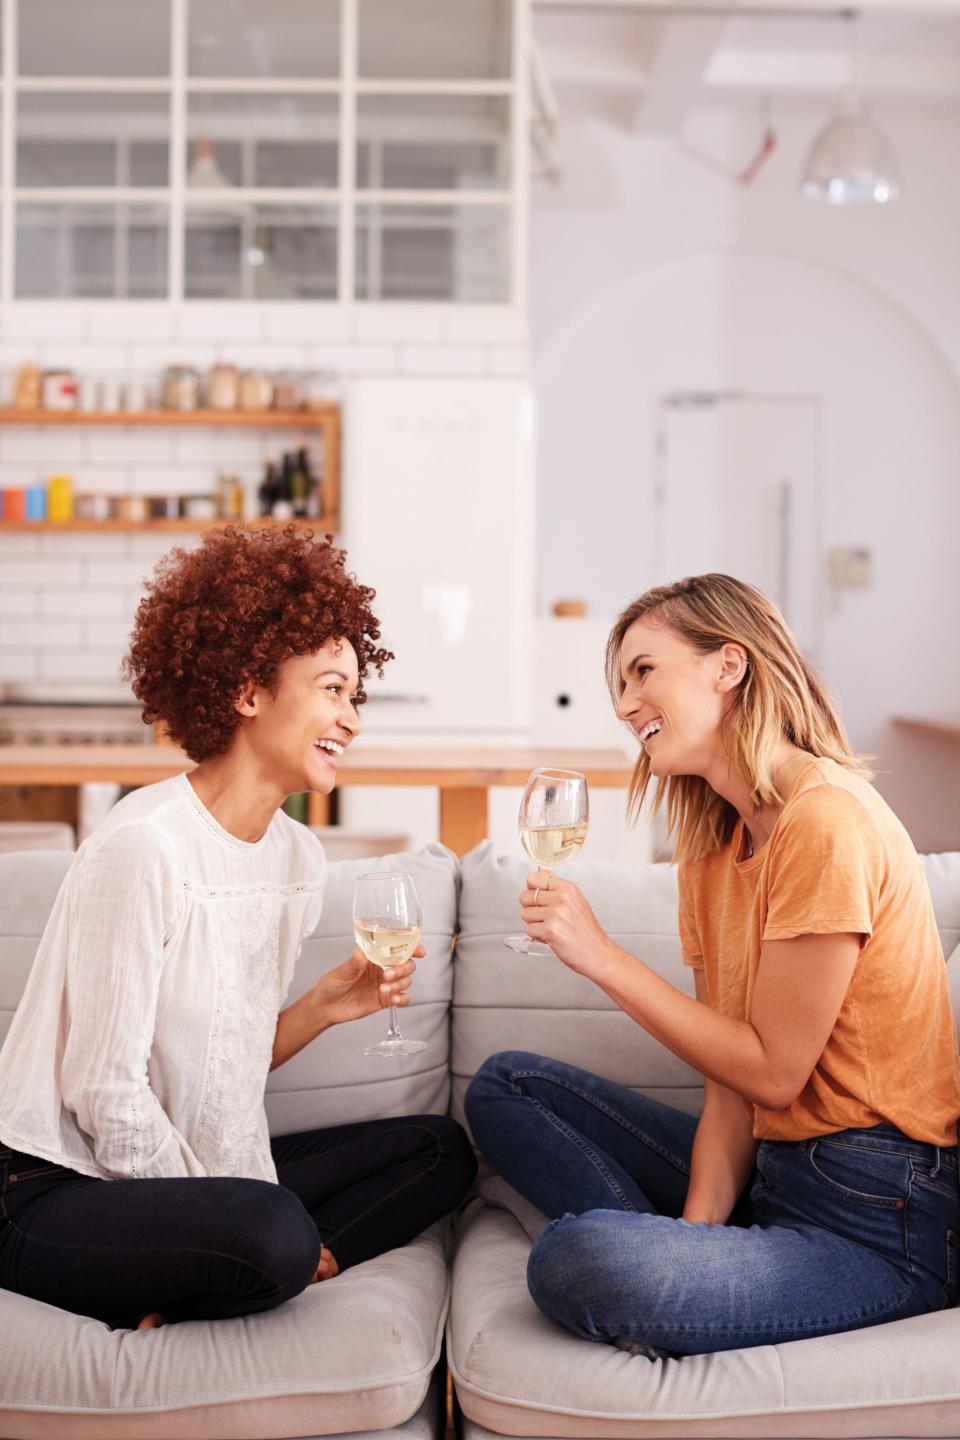 Hanging out with friends indoors is a great way to continue socializing during the winter months.